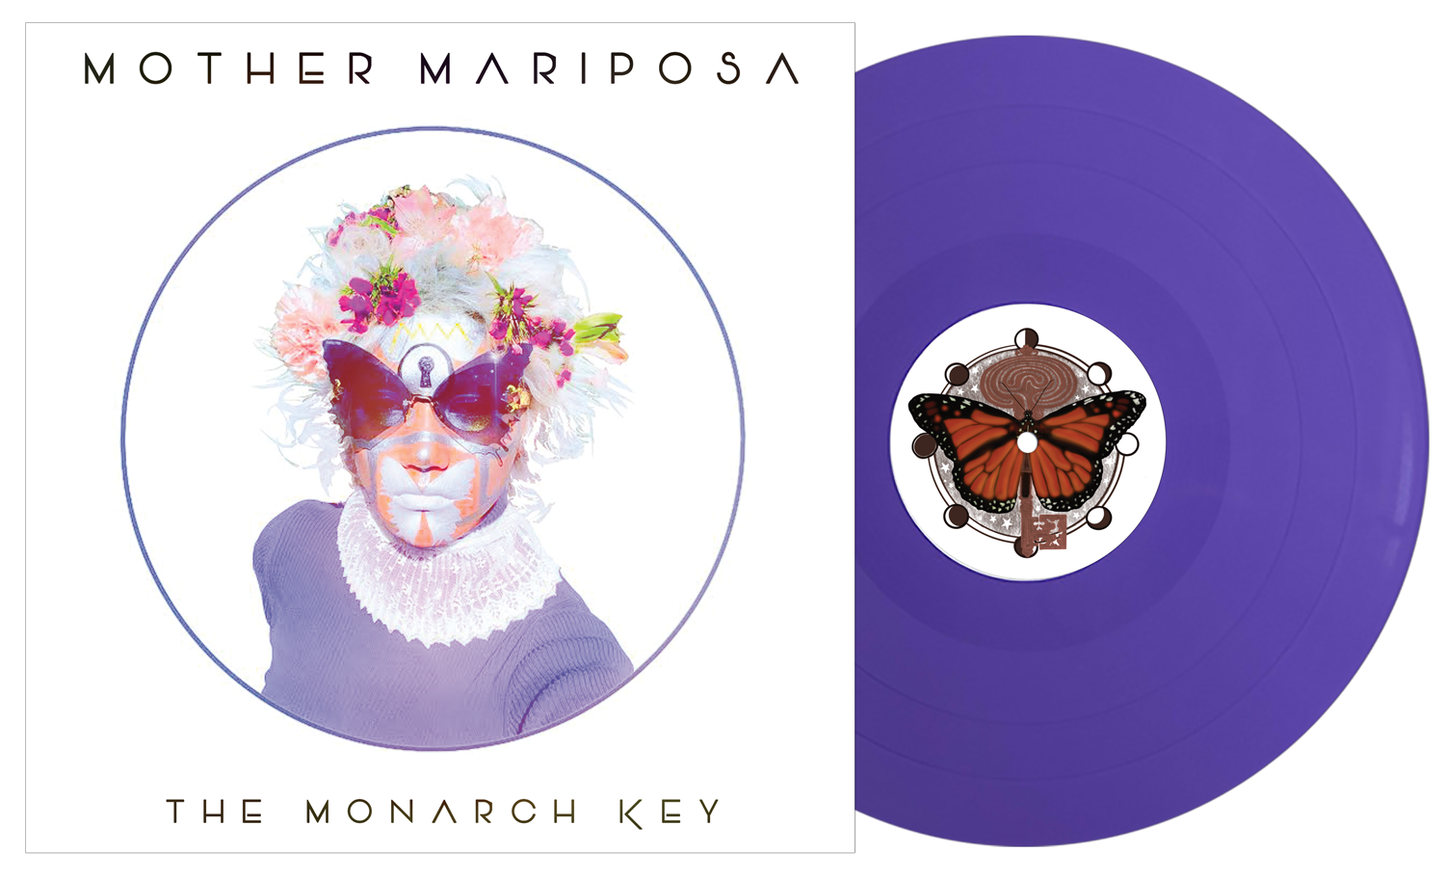 Mother Mariposa - The Monarch Key